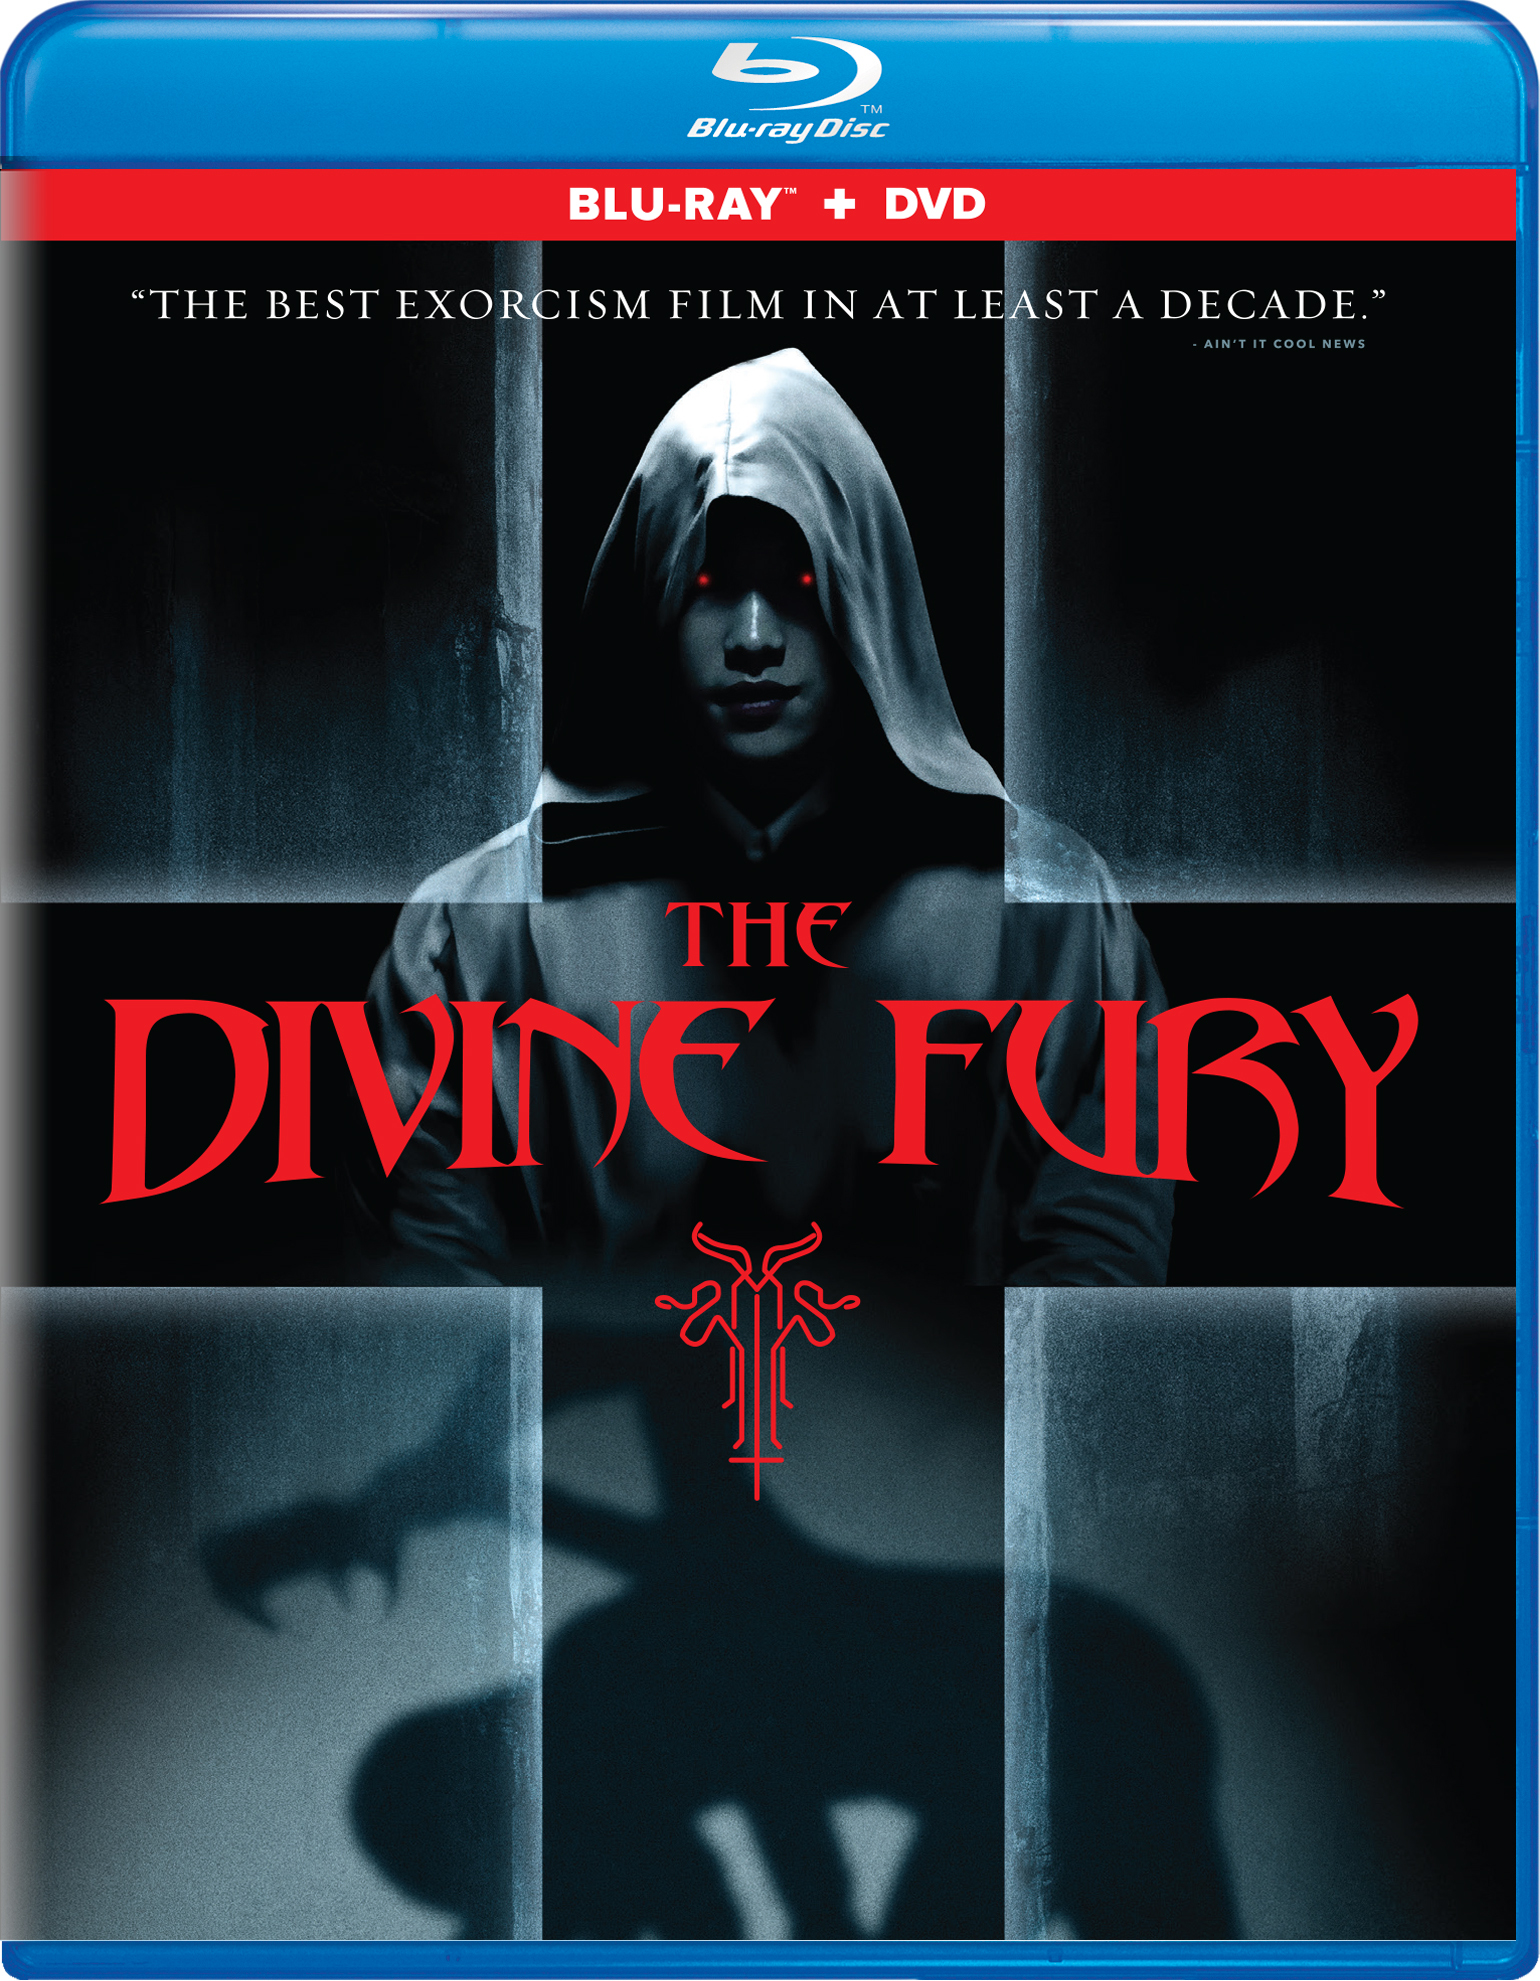 The Divine Fury (with DVD) - Blu-ray [ 2019 ]  - Action Movies On Blu-ray - Movies On GRUV